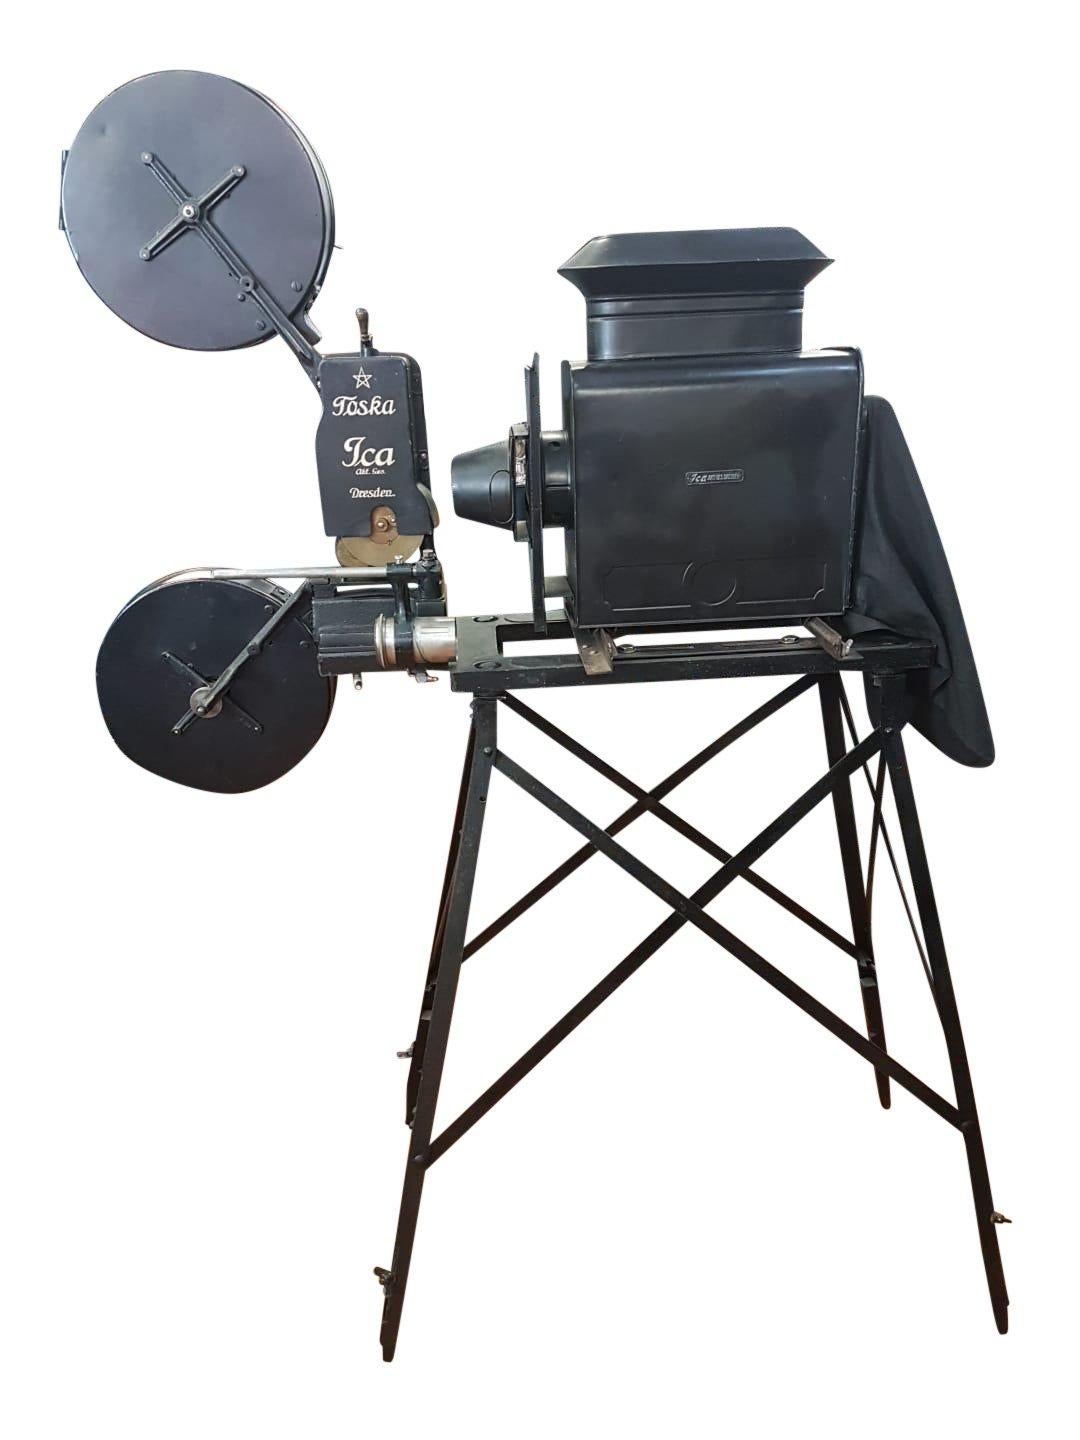 Antique and rare film projector Ica Tosca 35 mm with manual operation and arc light
ICA-TOSCA antique film and slide projector, 1910
film format 35 mm - large slides
With 2 lenses for film and slides
Well working mechanism.